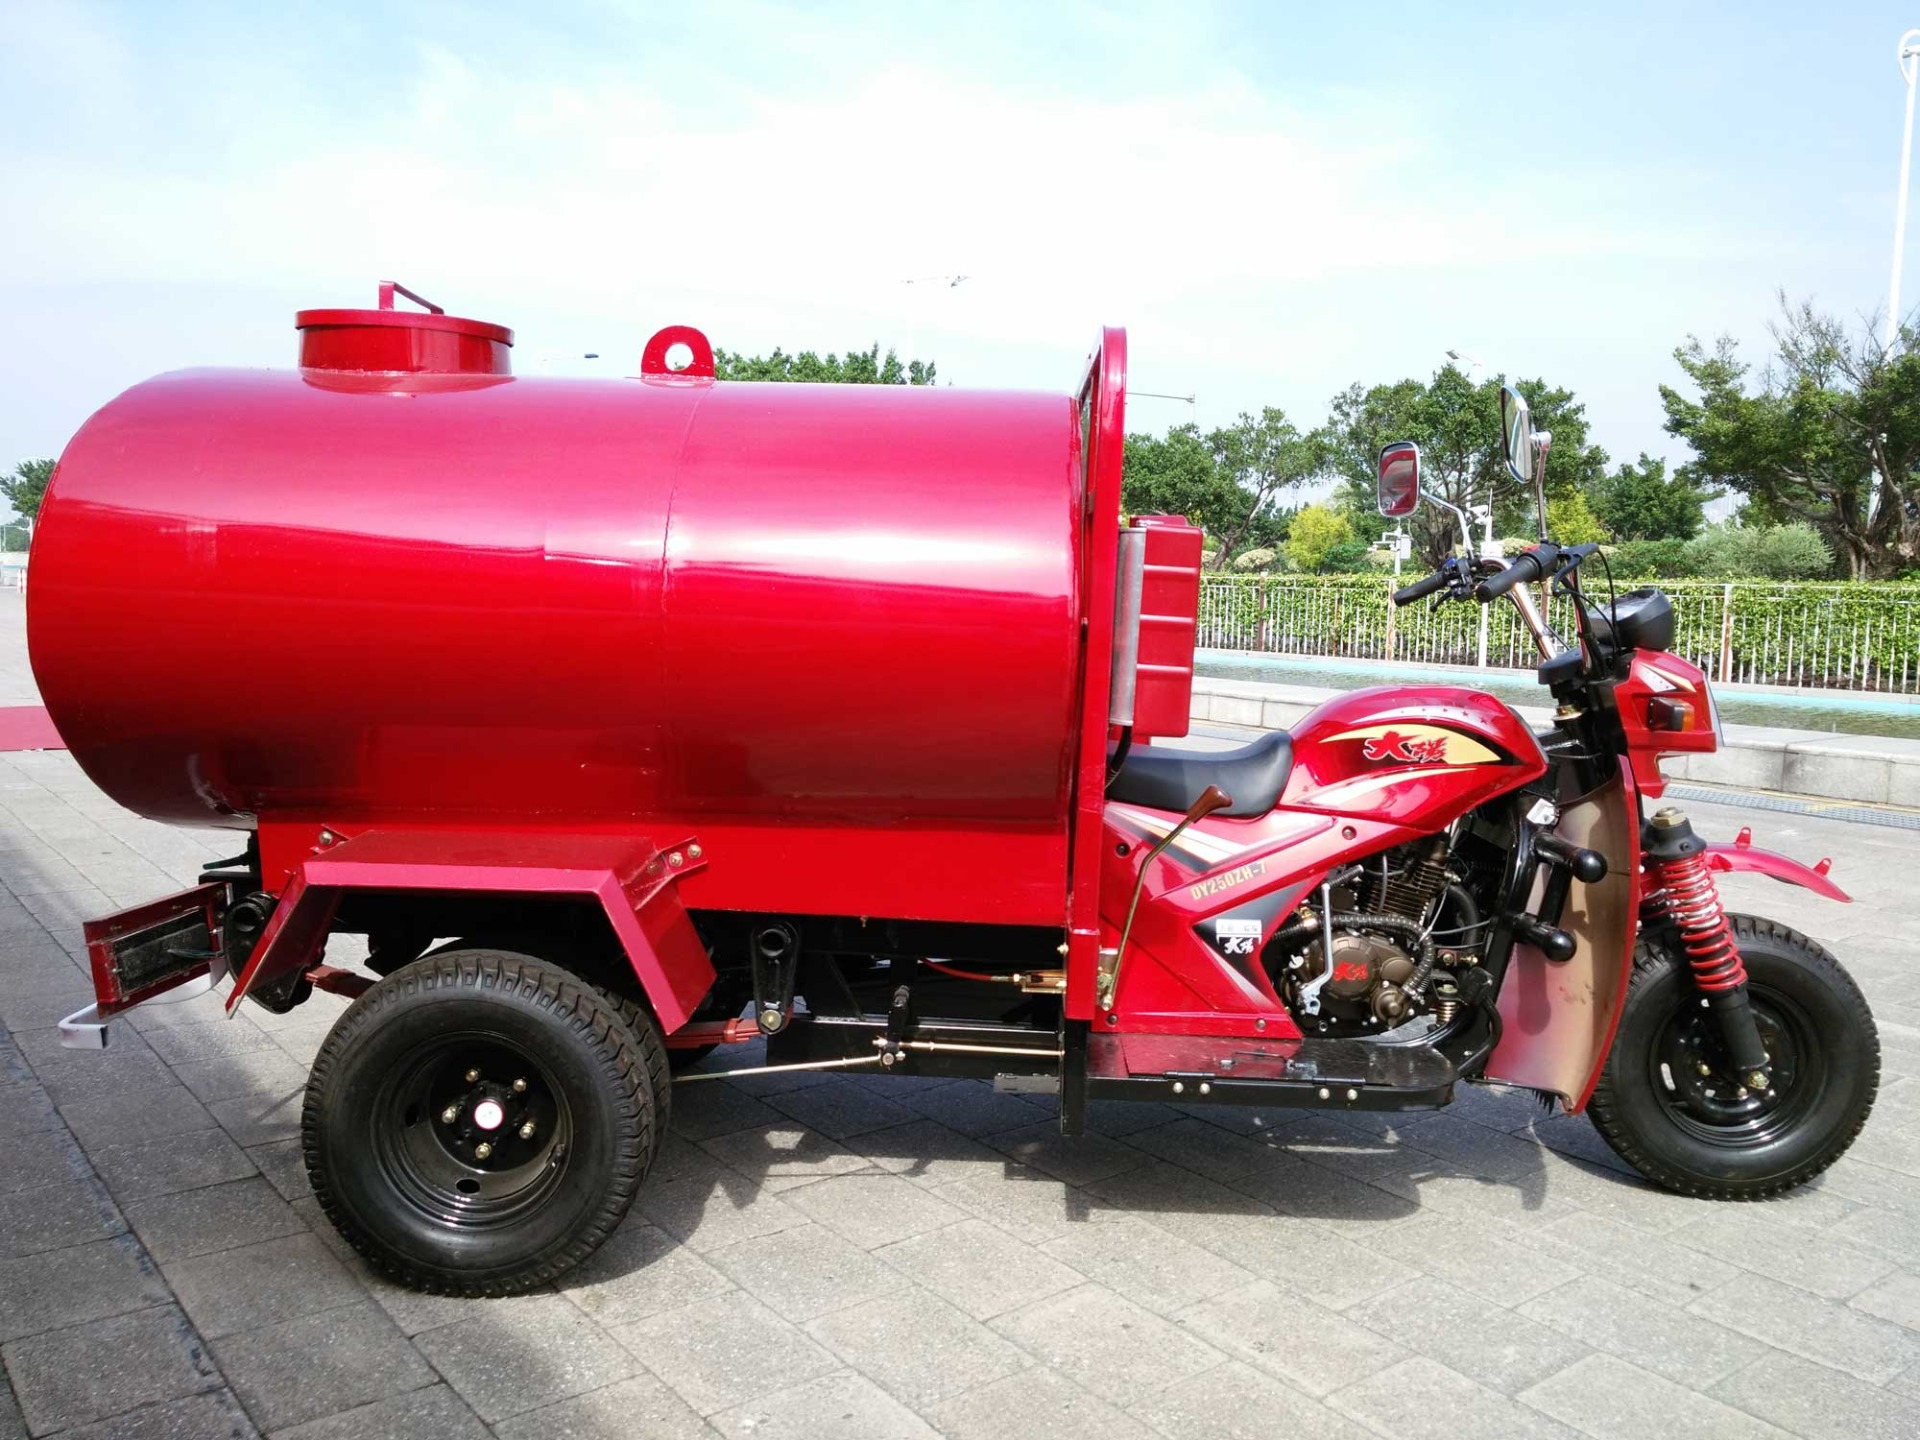 DW-5 African new hot popular fashionable tank water tricycle tuk tuk three wheel motorcycle 250cc water tank tricycle